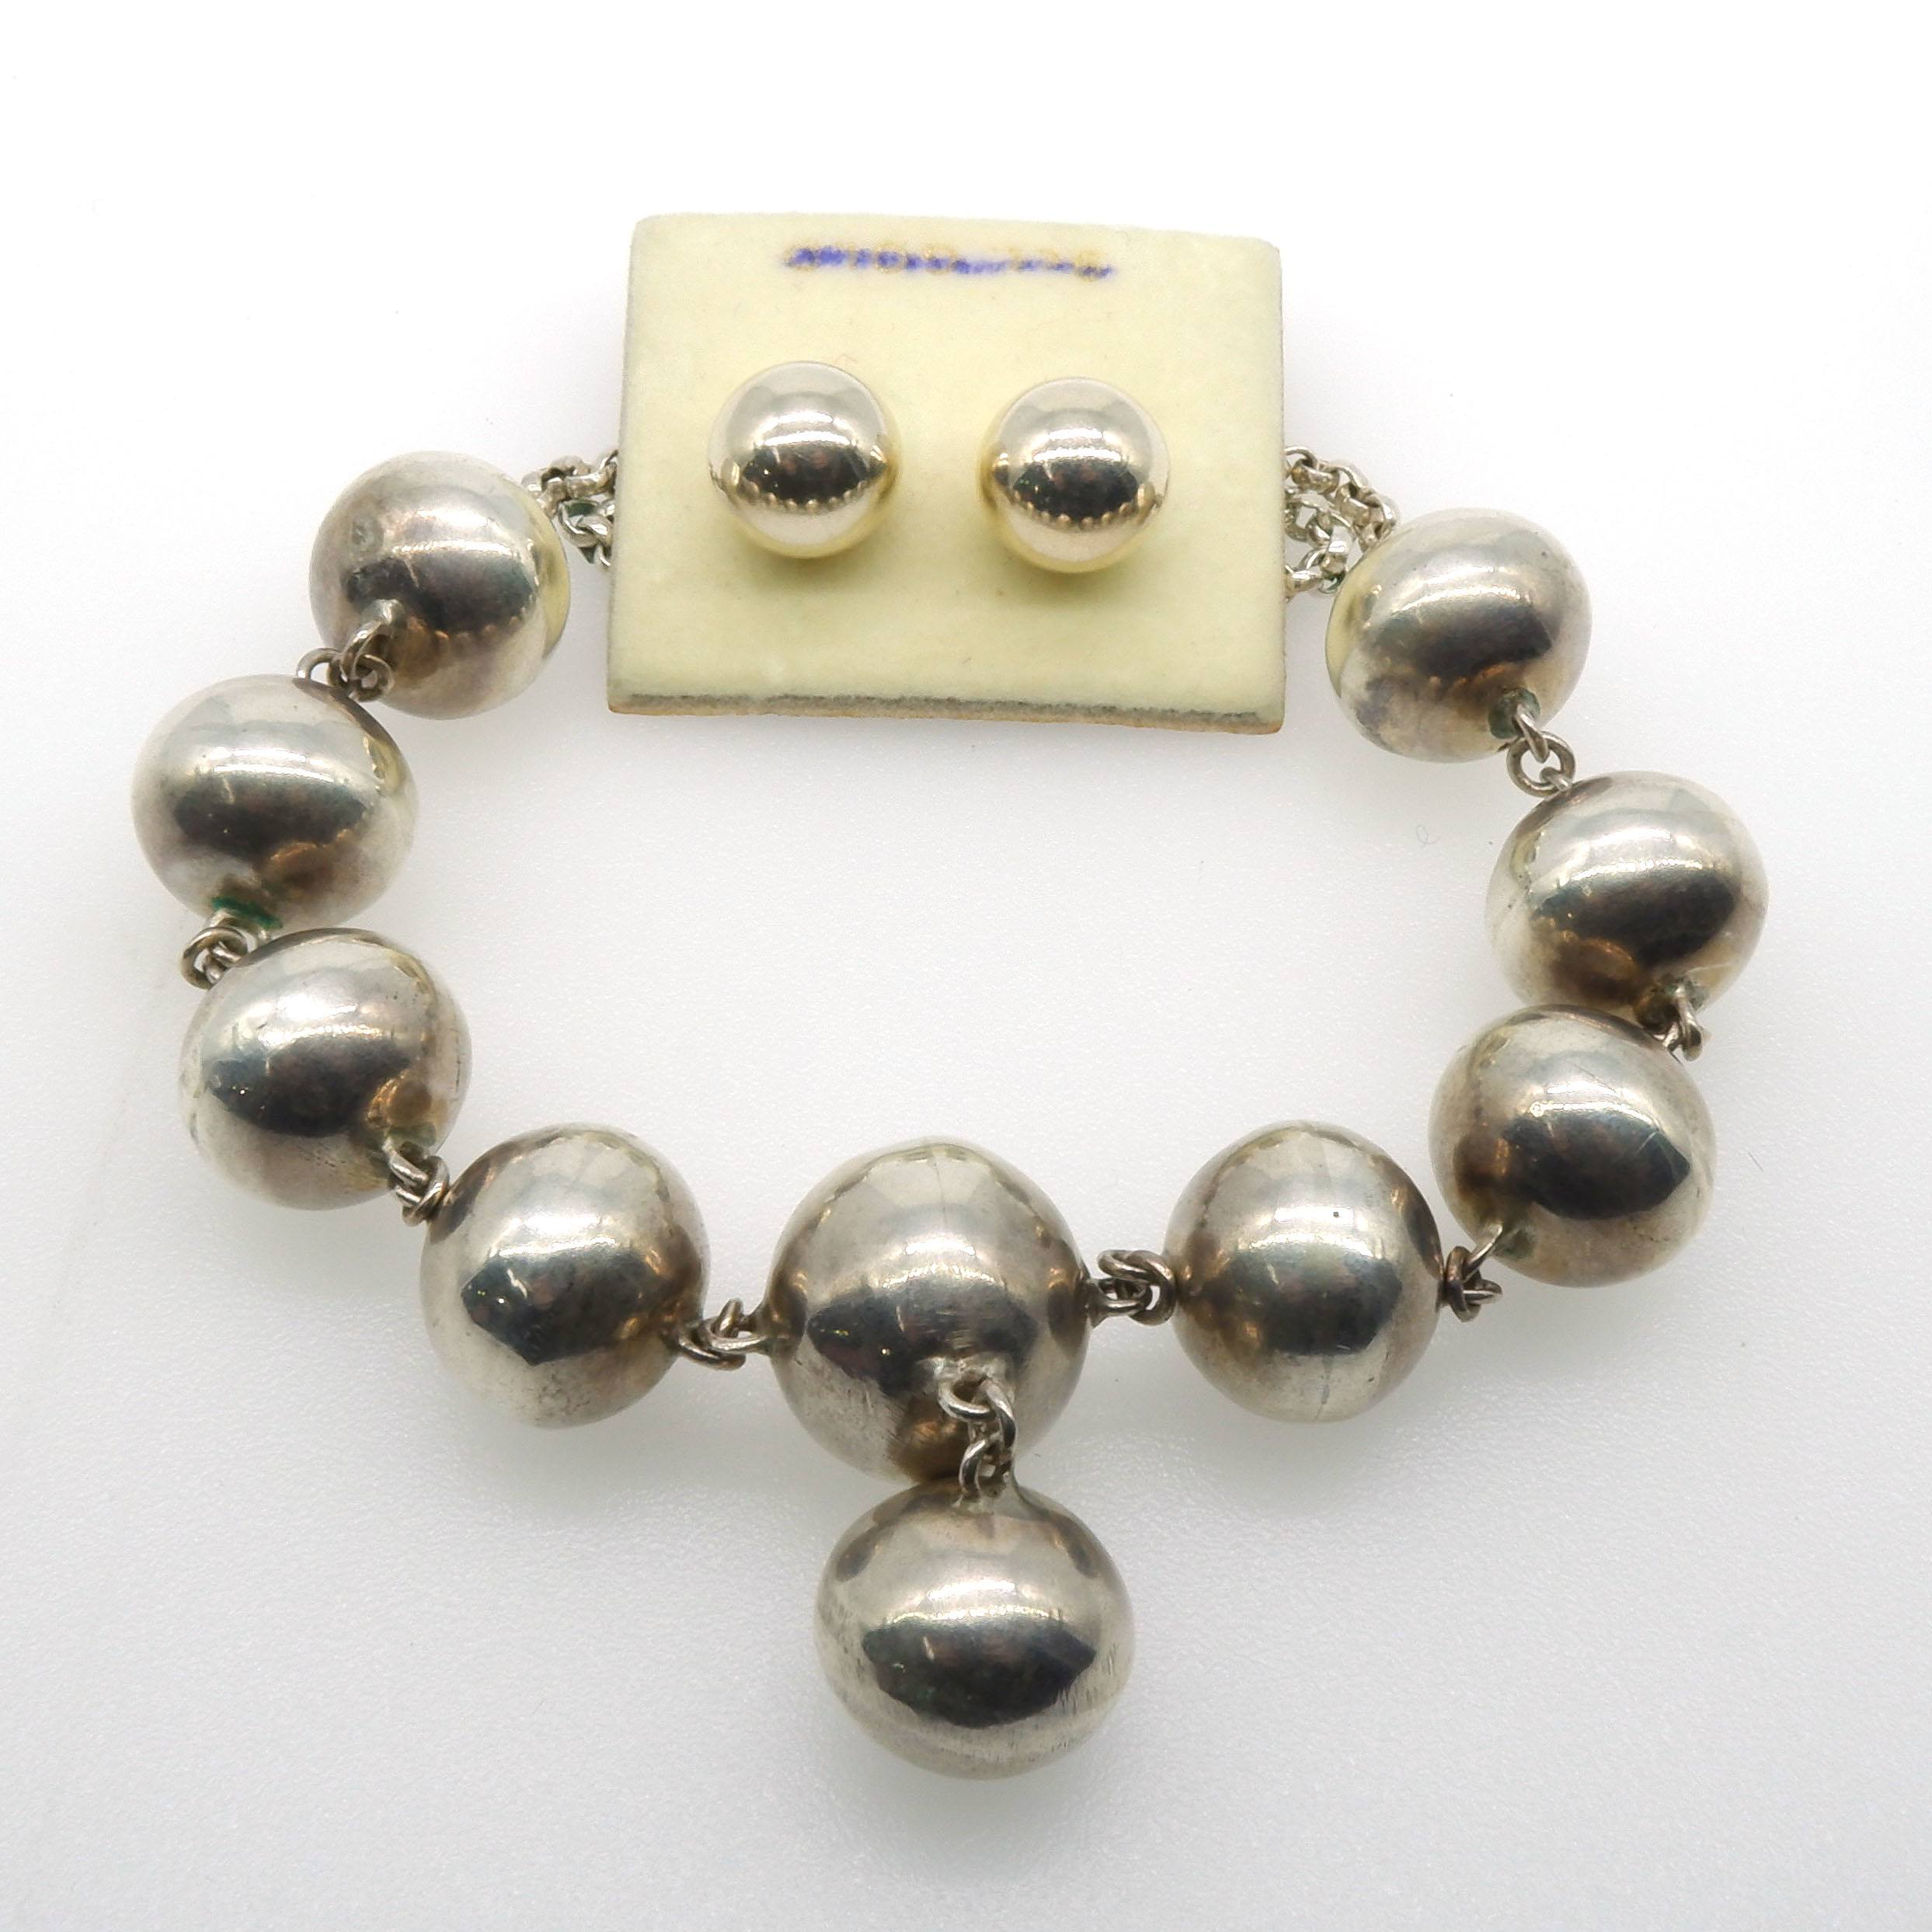 'Handmade Silver Hollow Oval Balls Linked Together at the Centre of a Belcher Chain with Matching Earrings'